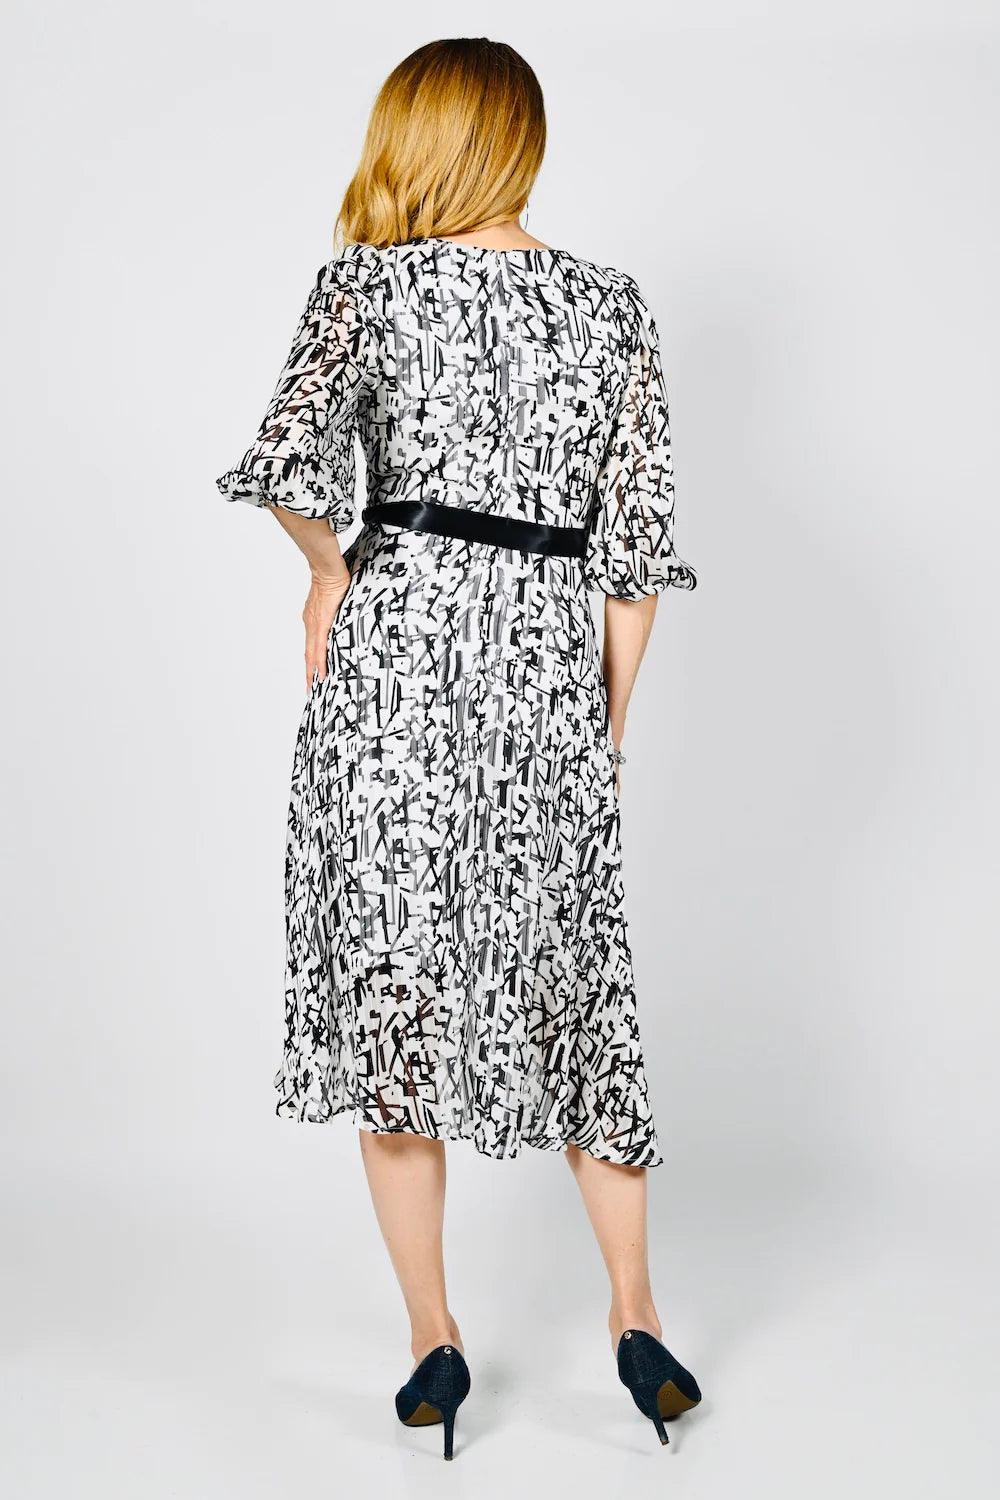 Off-White And Black Graphic Print Dress 236244